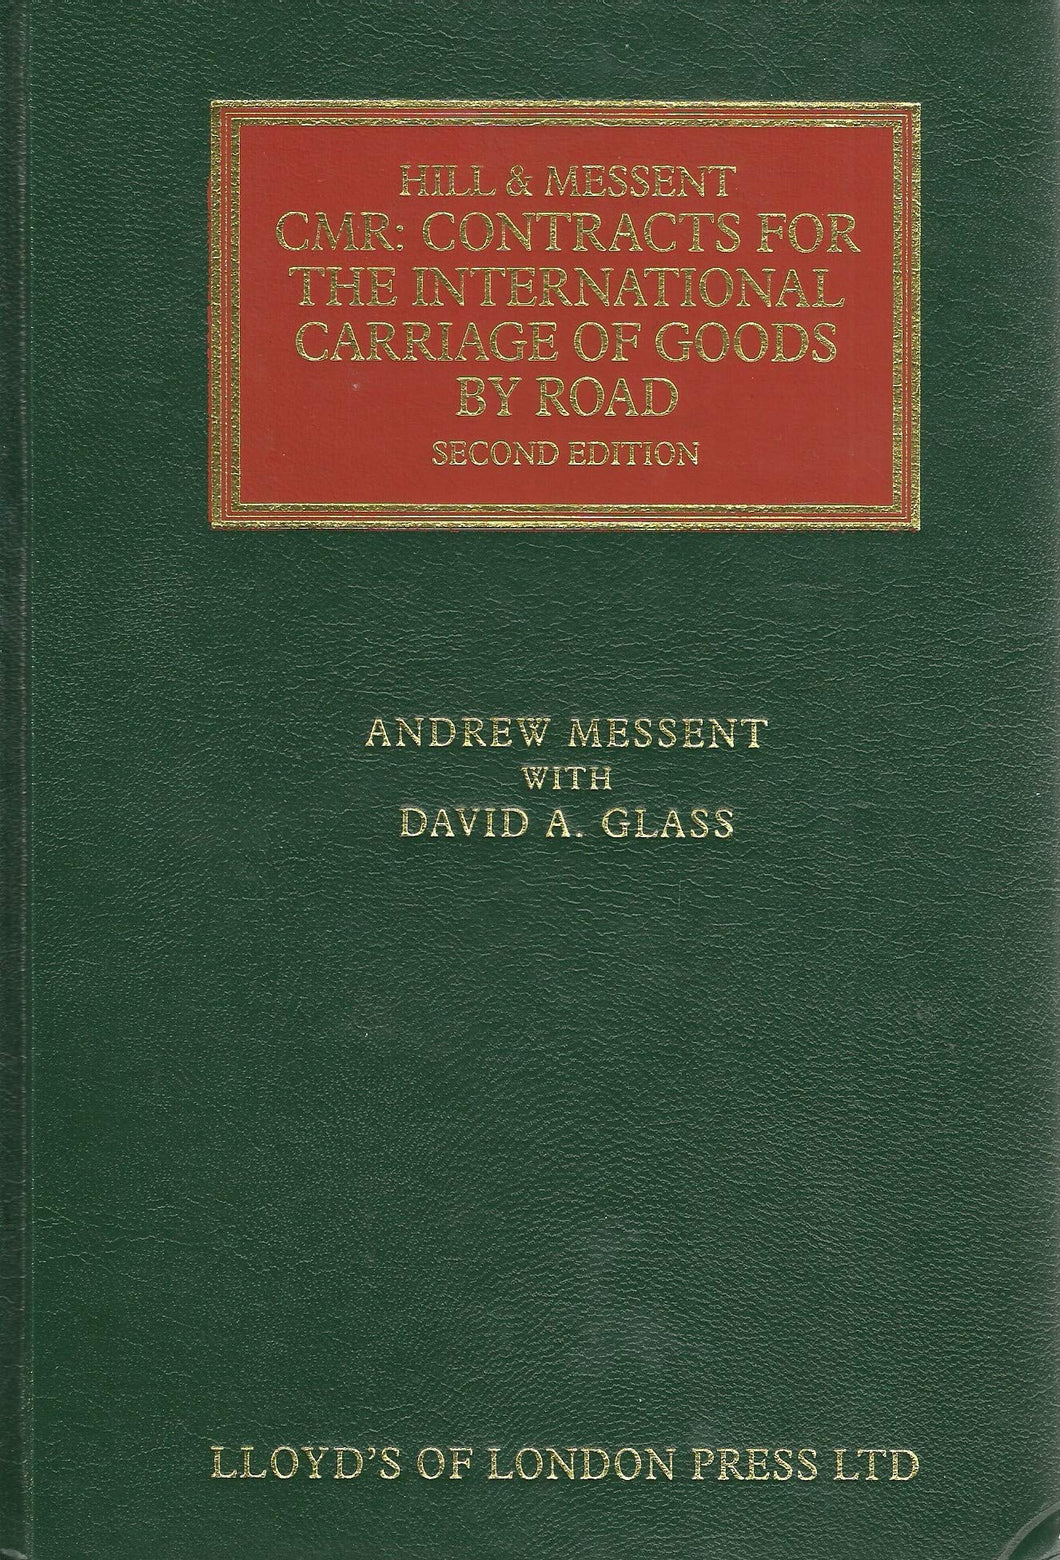 C.M.R.: Contracts for the International Carriage of Goods by Road (Lloyd's Shipping Law Library)